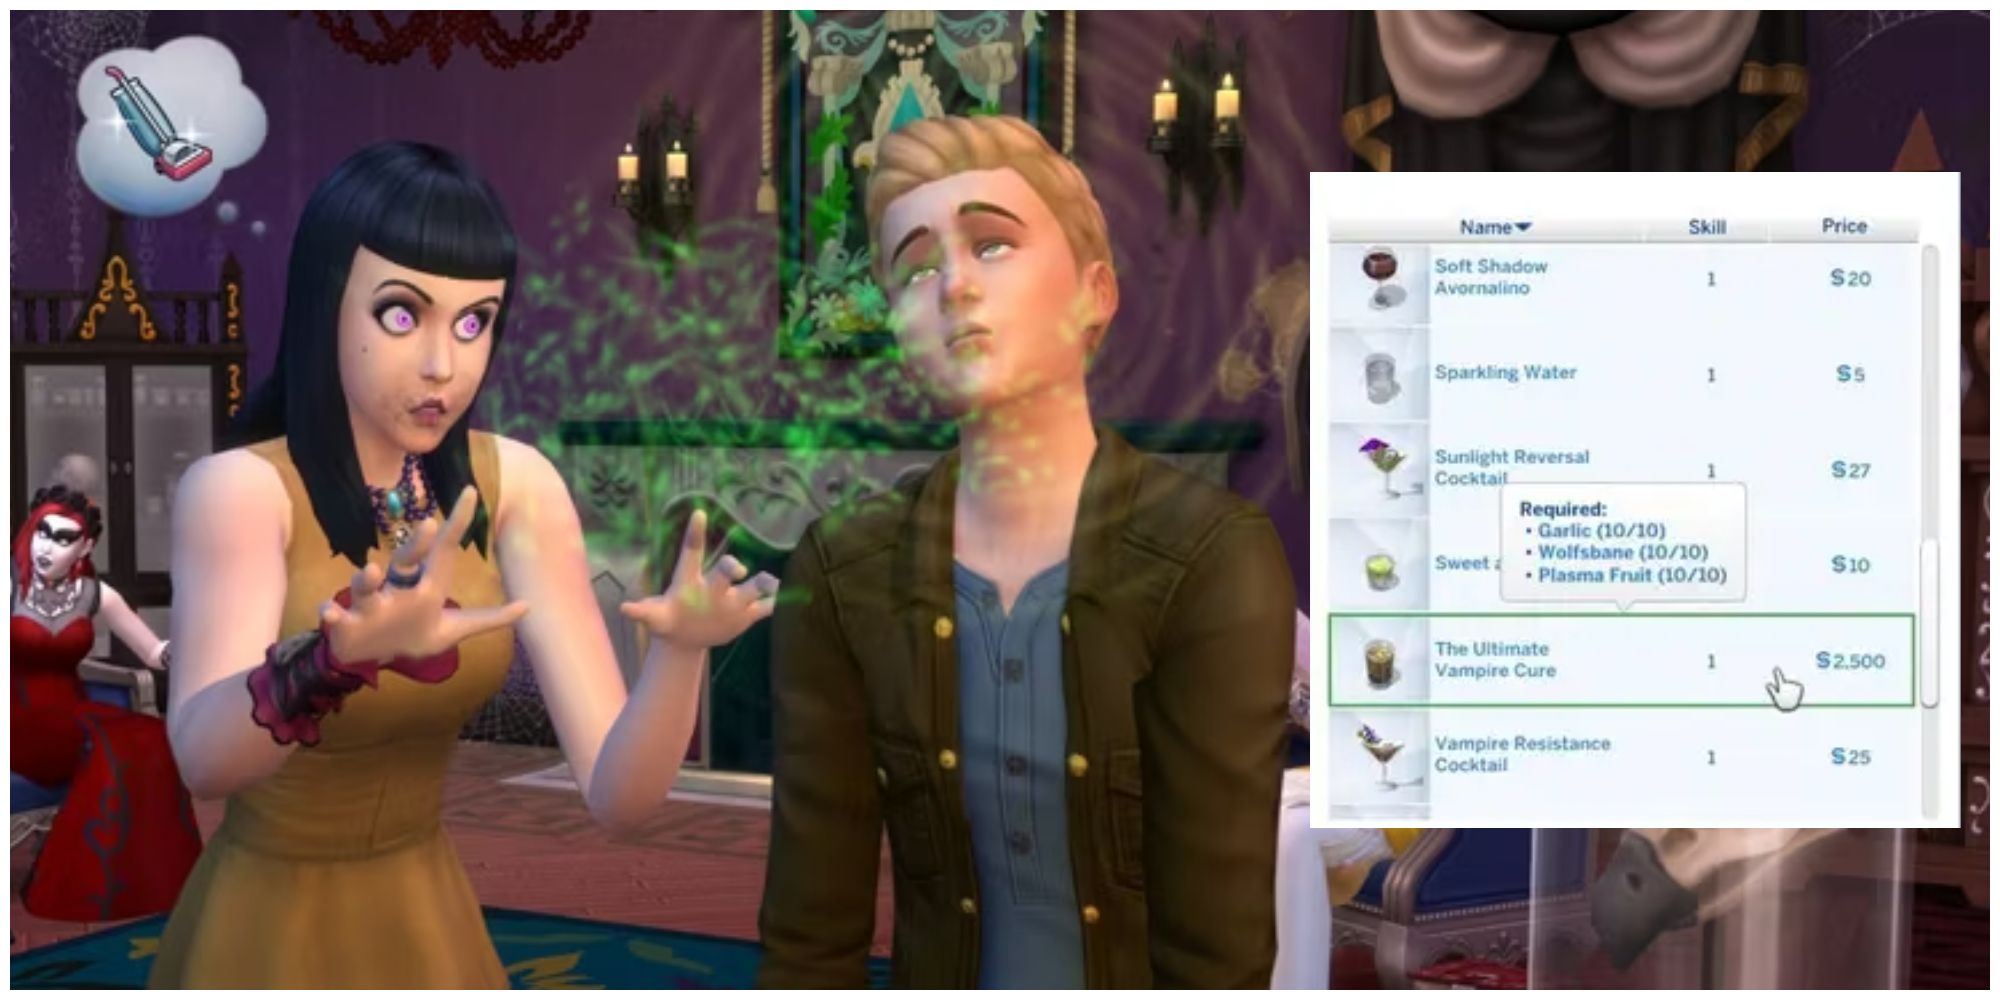 Create a drink that can cure vampirism in the Sims 4 - The Ultimate Vampire Cure